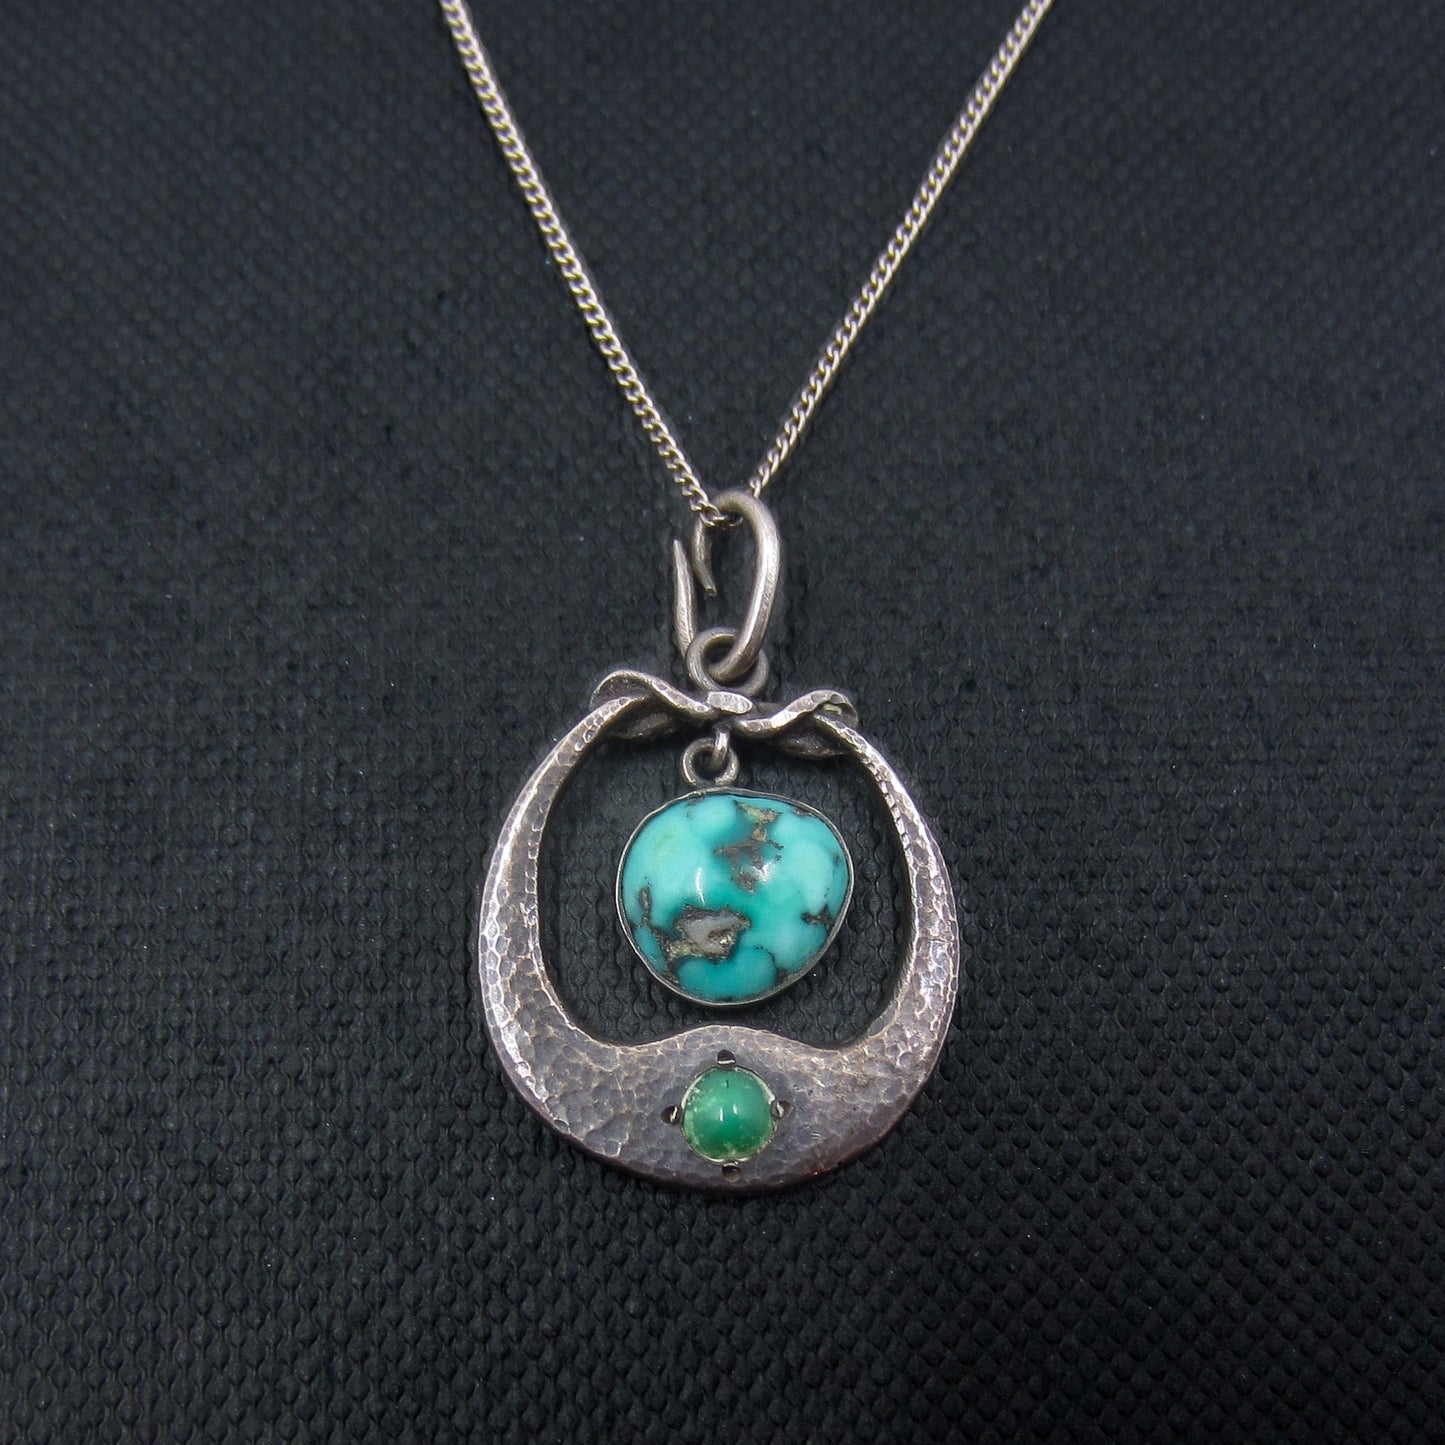 SOLD--Rare Arts & Crafts Hammered Turquoise Pendant Sterling, Liberty & Co c. 1910